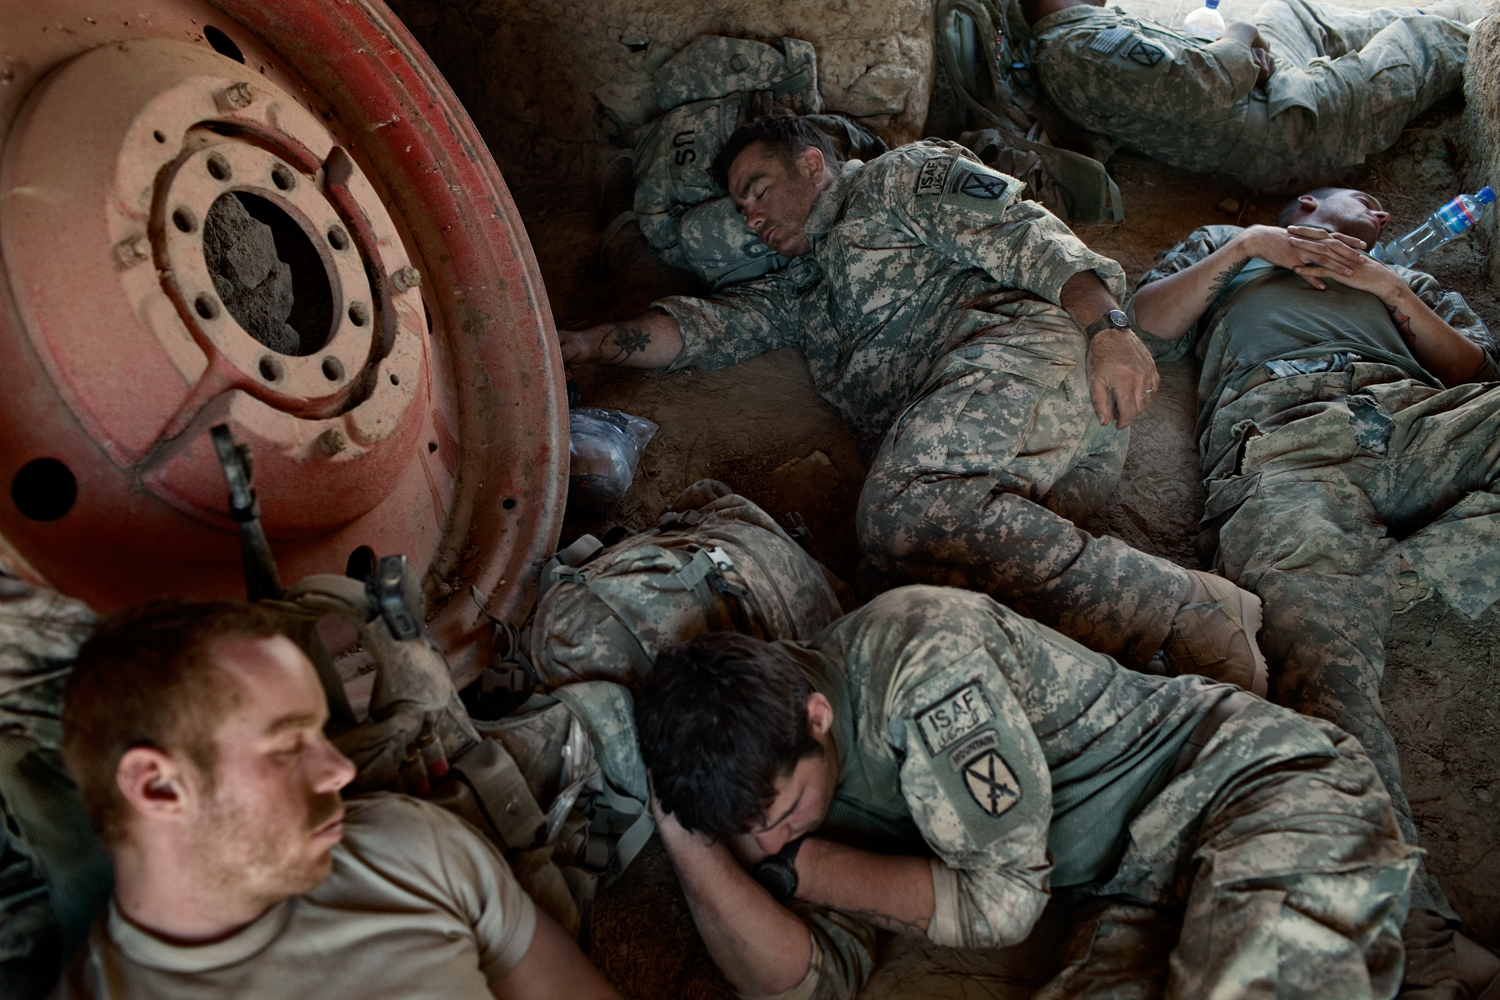  U.S. Army soldiers sleep at a temporary patrol base during an operation in the Tangi Valley, Wardak Province,&nbsp;Afghanistan.    